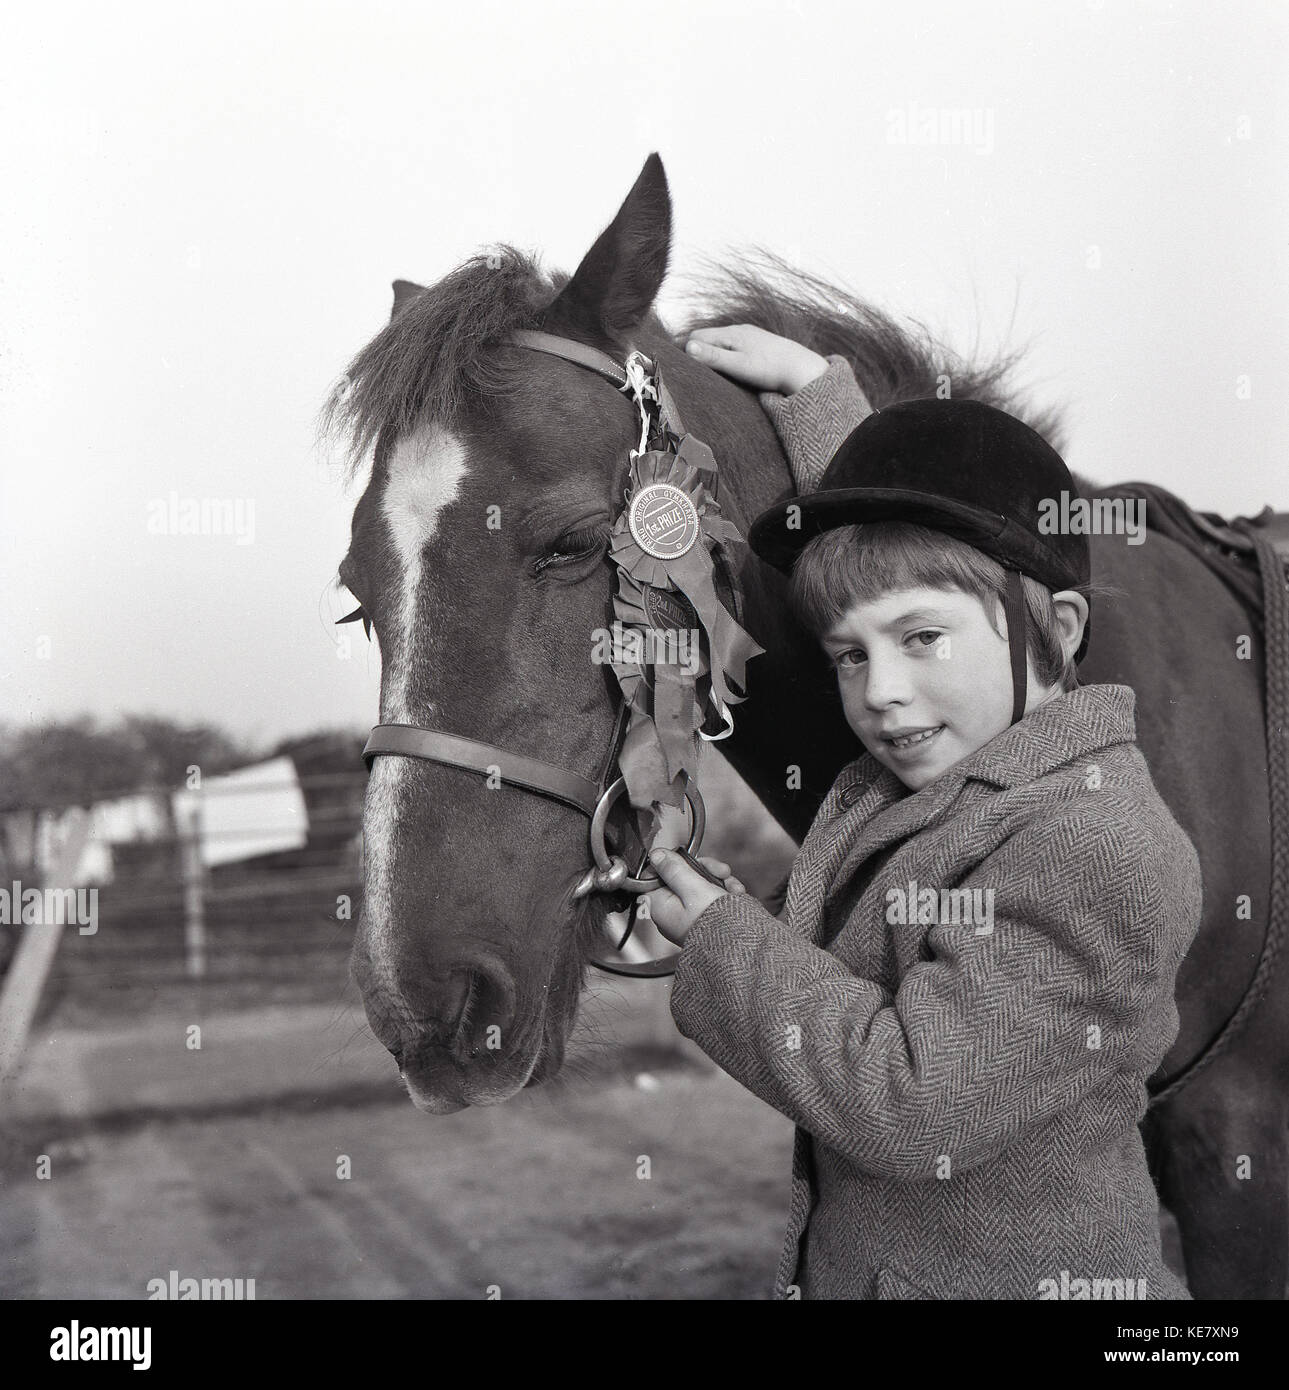 Girls love horses.....in this historical picutre from the 1960s, we see a sweet young girl wearing a riding hat and tweed jacket holding her horse affectionately with one hand and the other hand holding  its bridle, attached to which are prize-winning rosettes, England, UK. Stock Photo